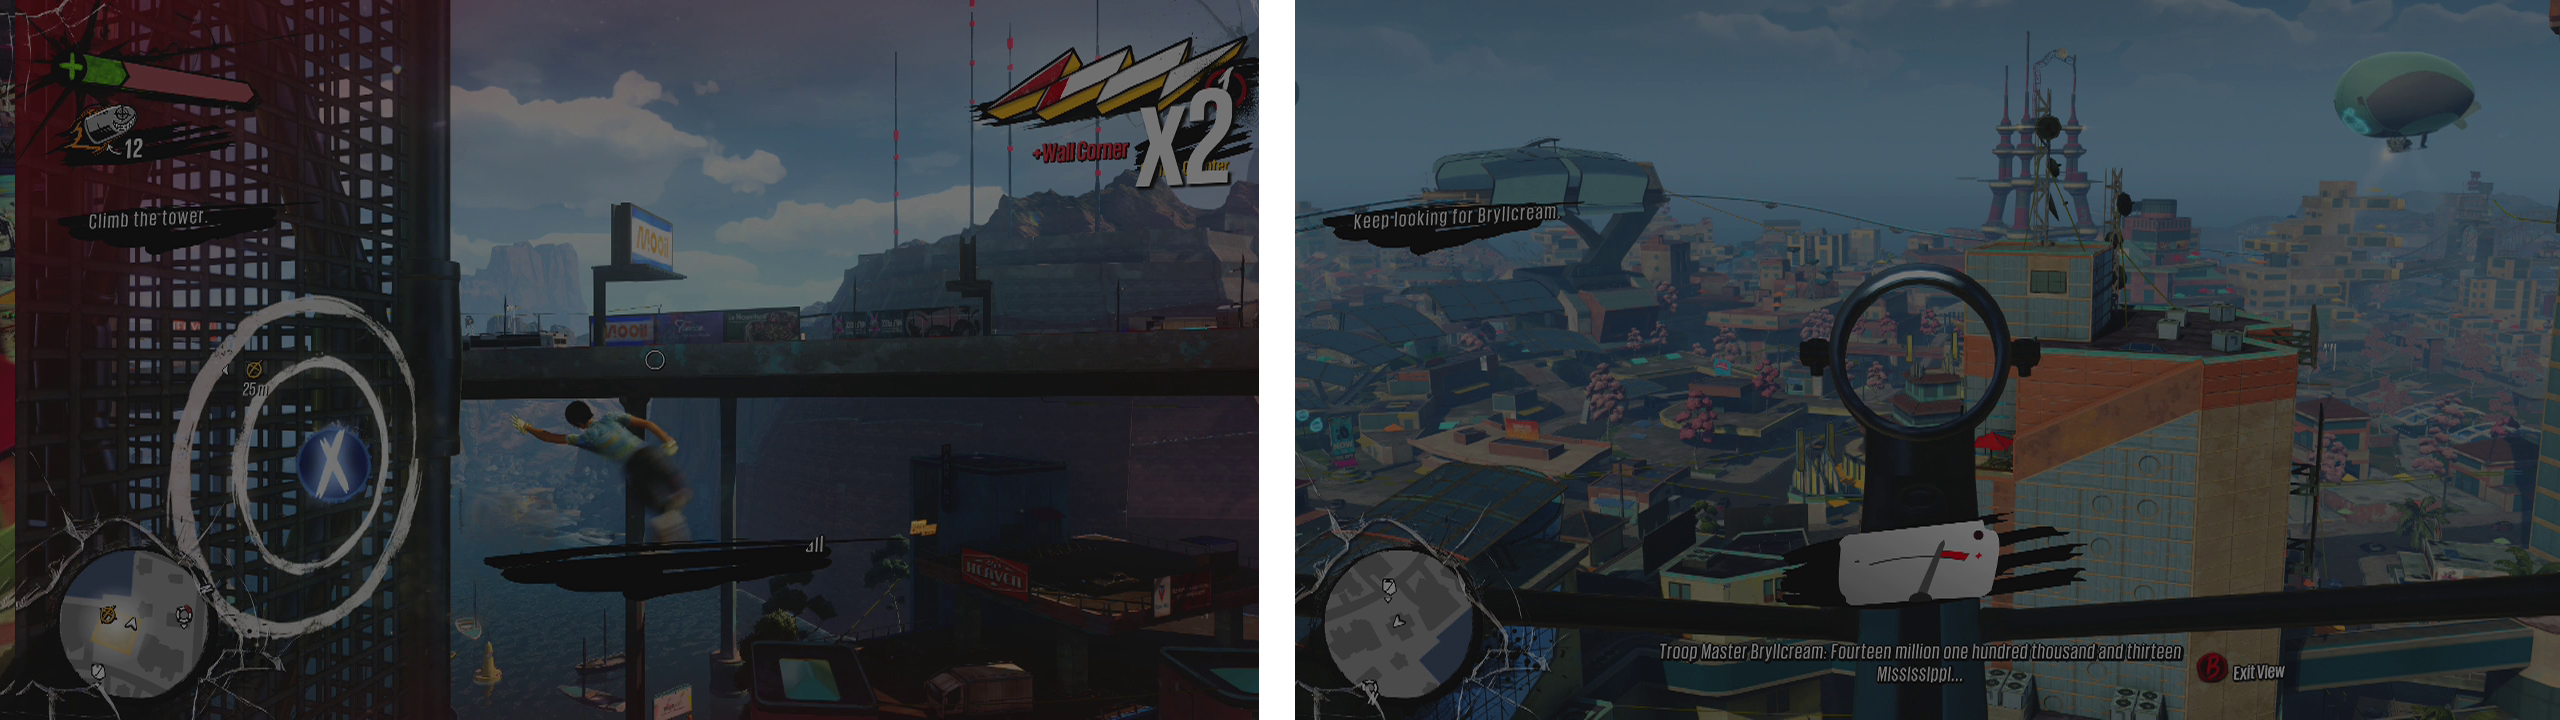 Climb the building (left) and use the radar scope at the top (right) to locate Bryllcream.